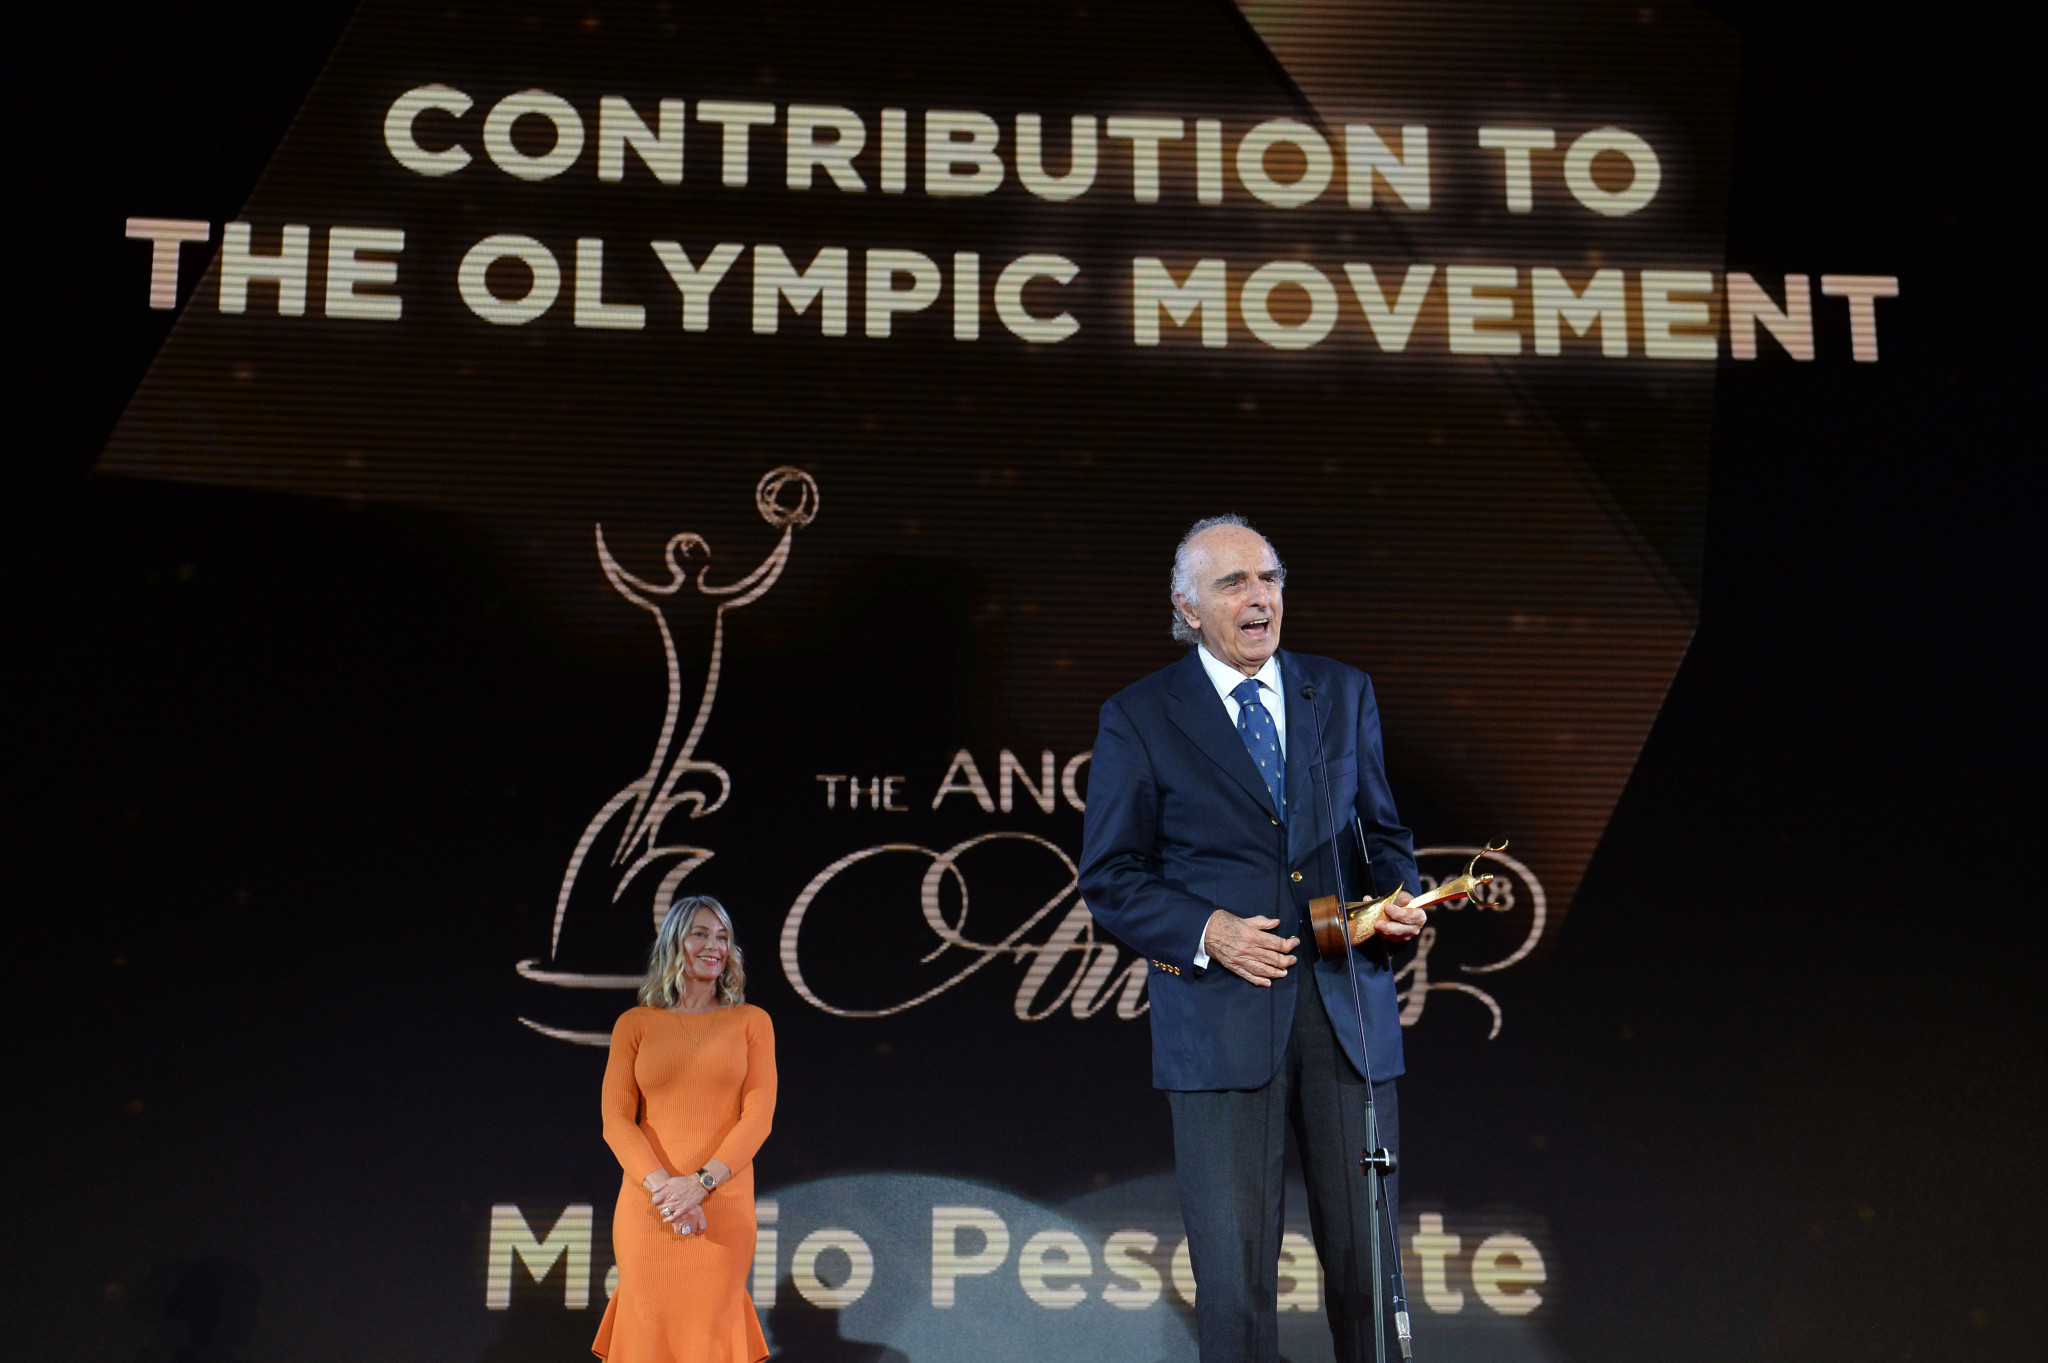 Mario Pescante was awarded the Contribution to the Olympic Movement prize ©Getty Images